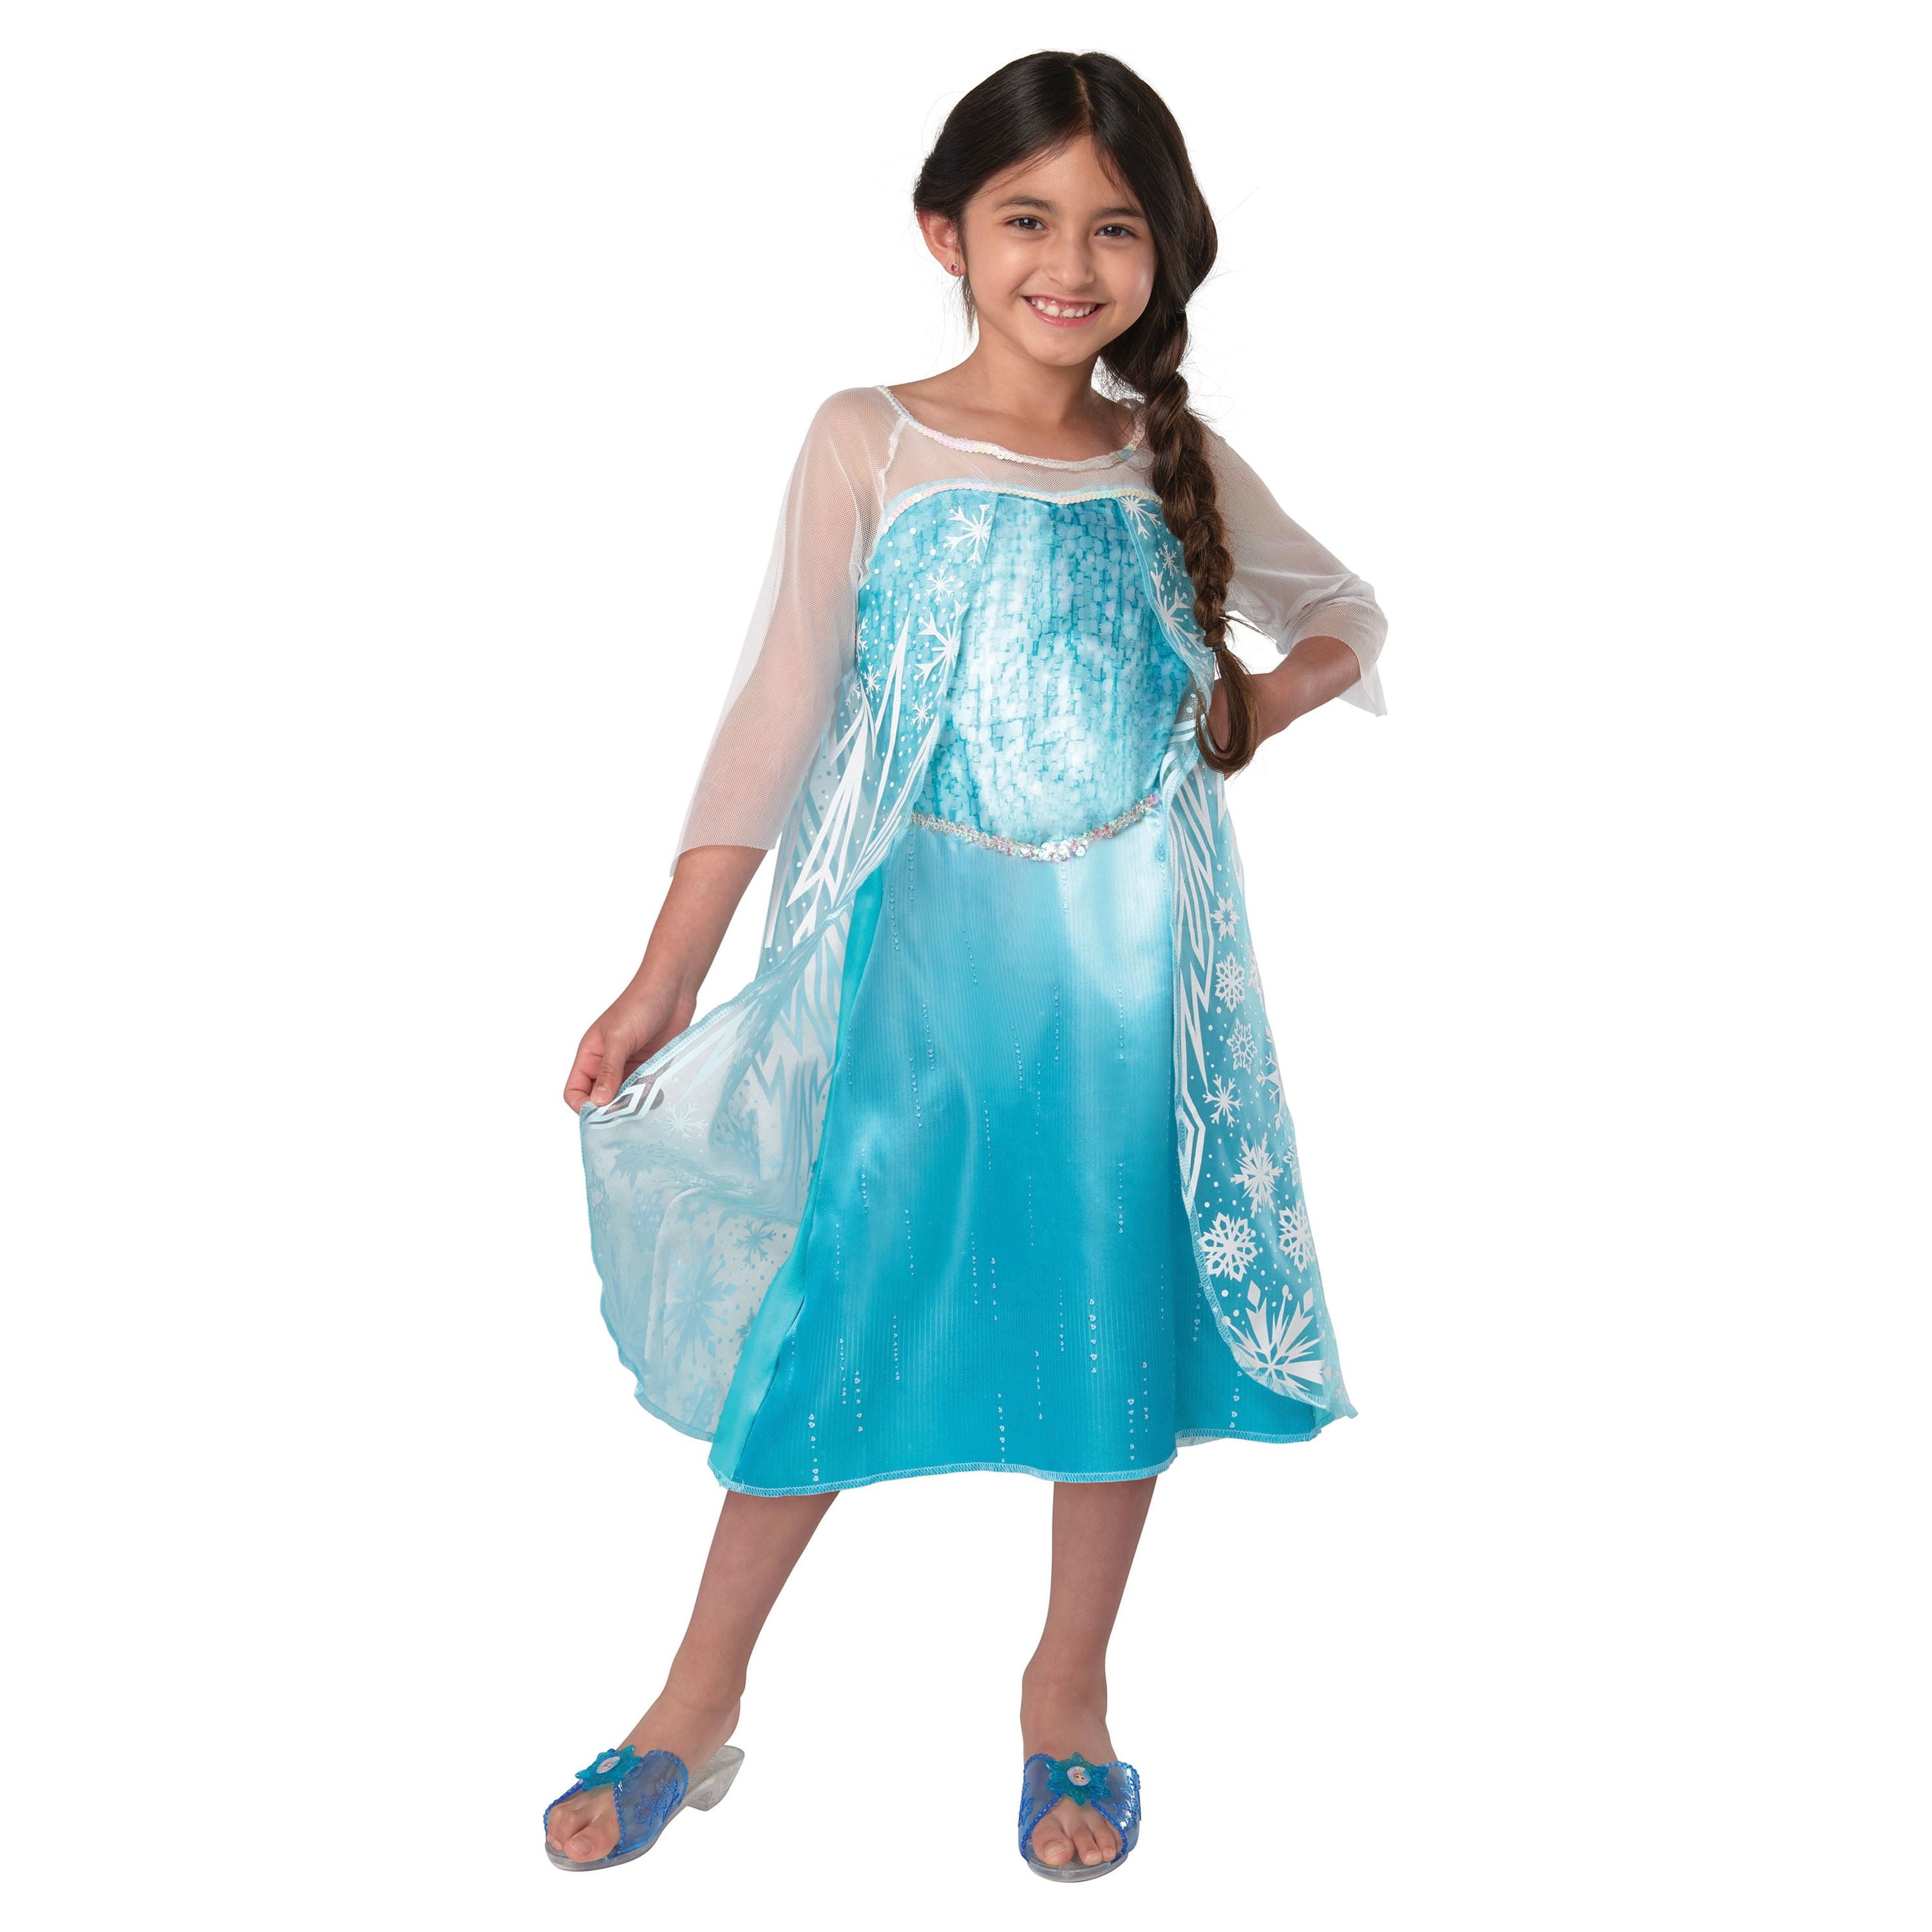 Disney's Frozen Elsa Film Inspired Fashion Dress with Intricate Cape ...